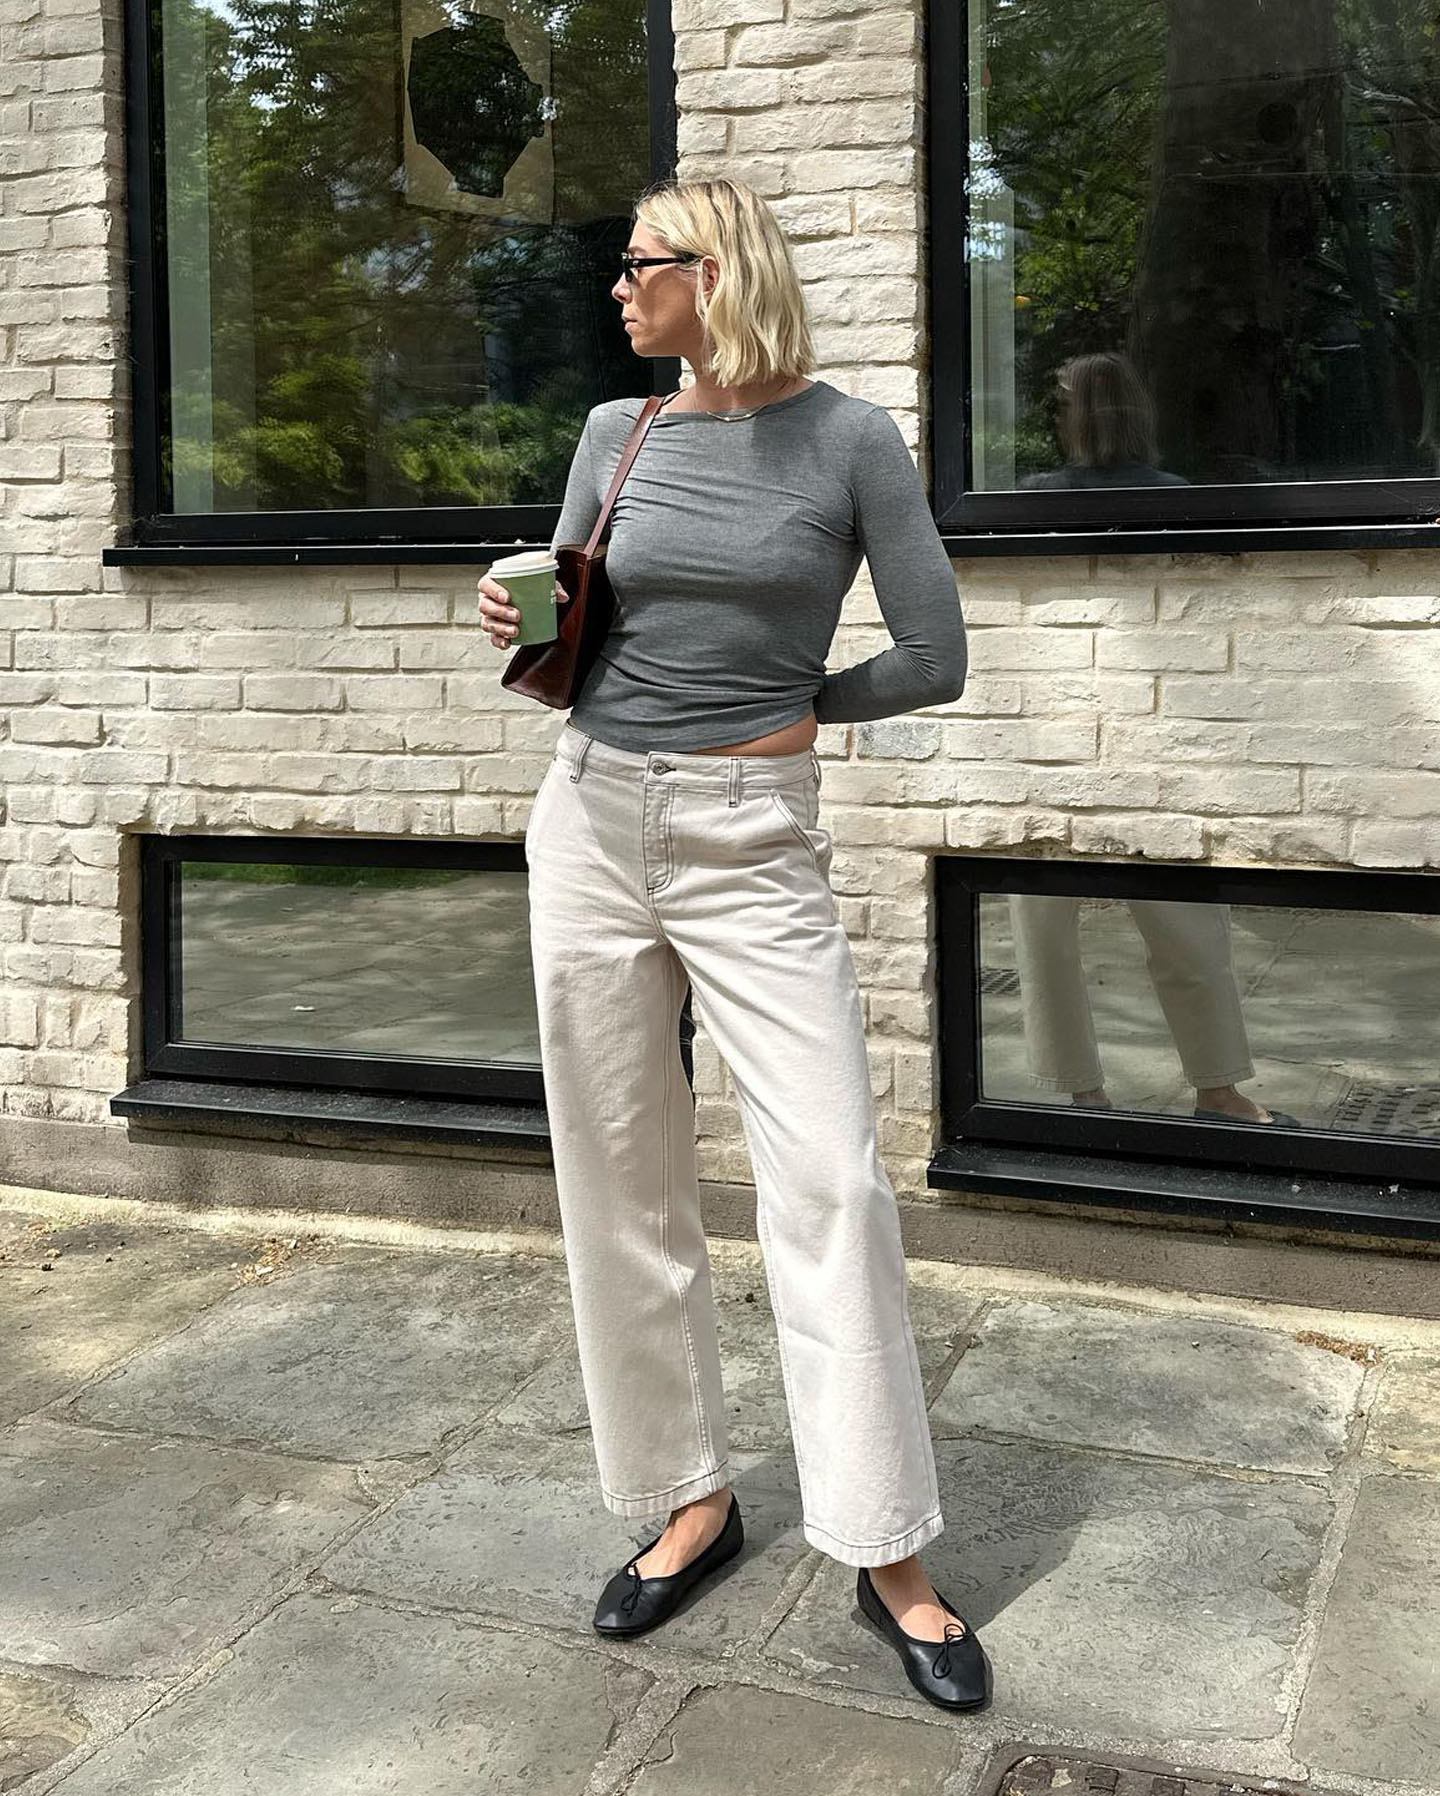 stylish influencer Lindsey Holland poses with her short blond bob on a sunny sidewalk wearing a long sleeve gray t-shirt, brown shoulder bag, off-white jeans, and black ballet flats